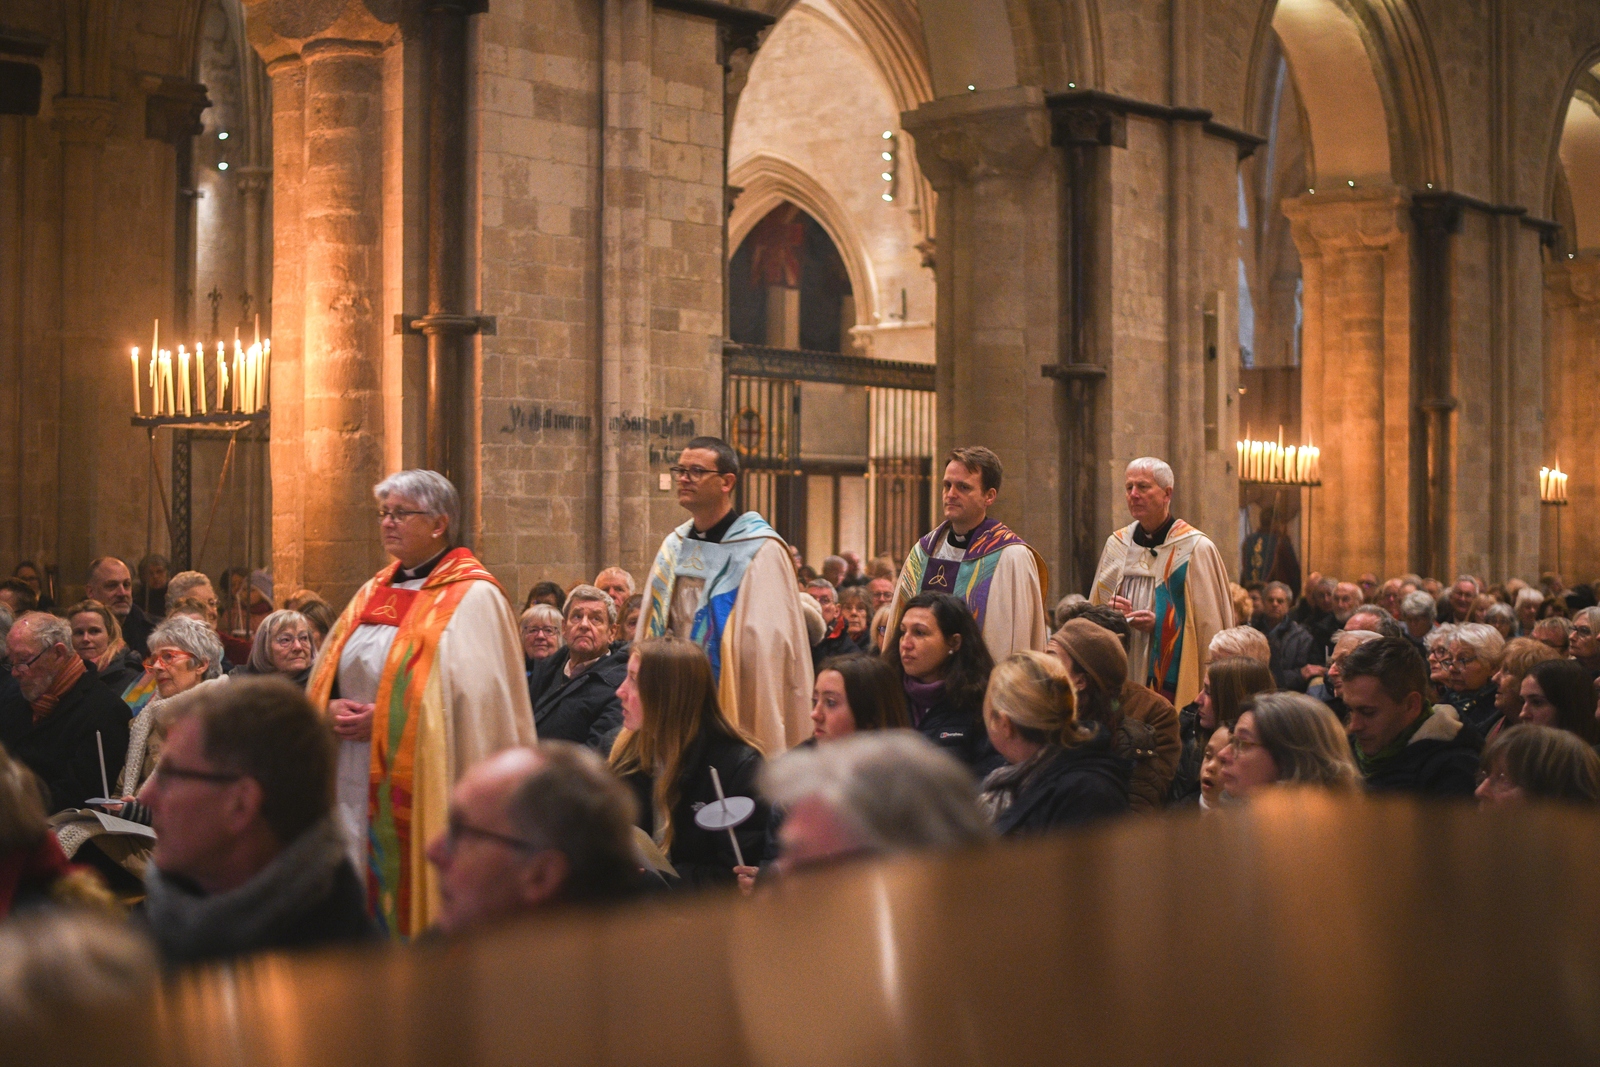 Cathedral Clergy process down the middle of the Nave in between rows of the congregation. Left to right, Canon Treasurer, Canon Chancellor, Canon Precentor and Interim Dean of Chichester)